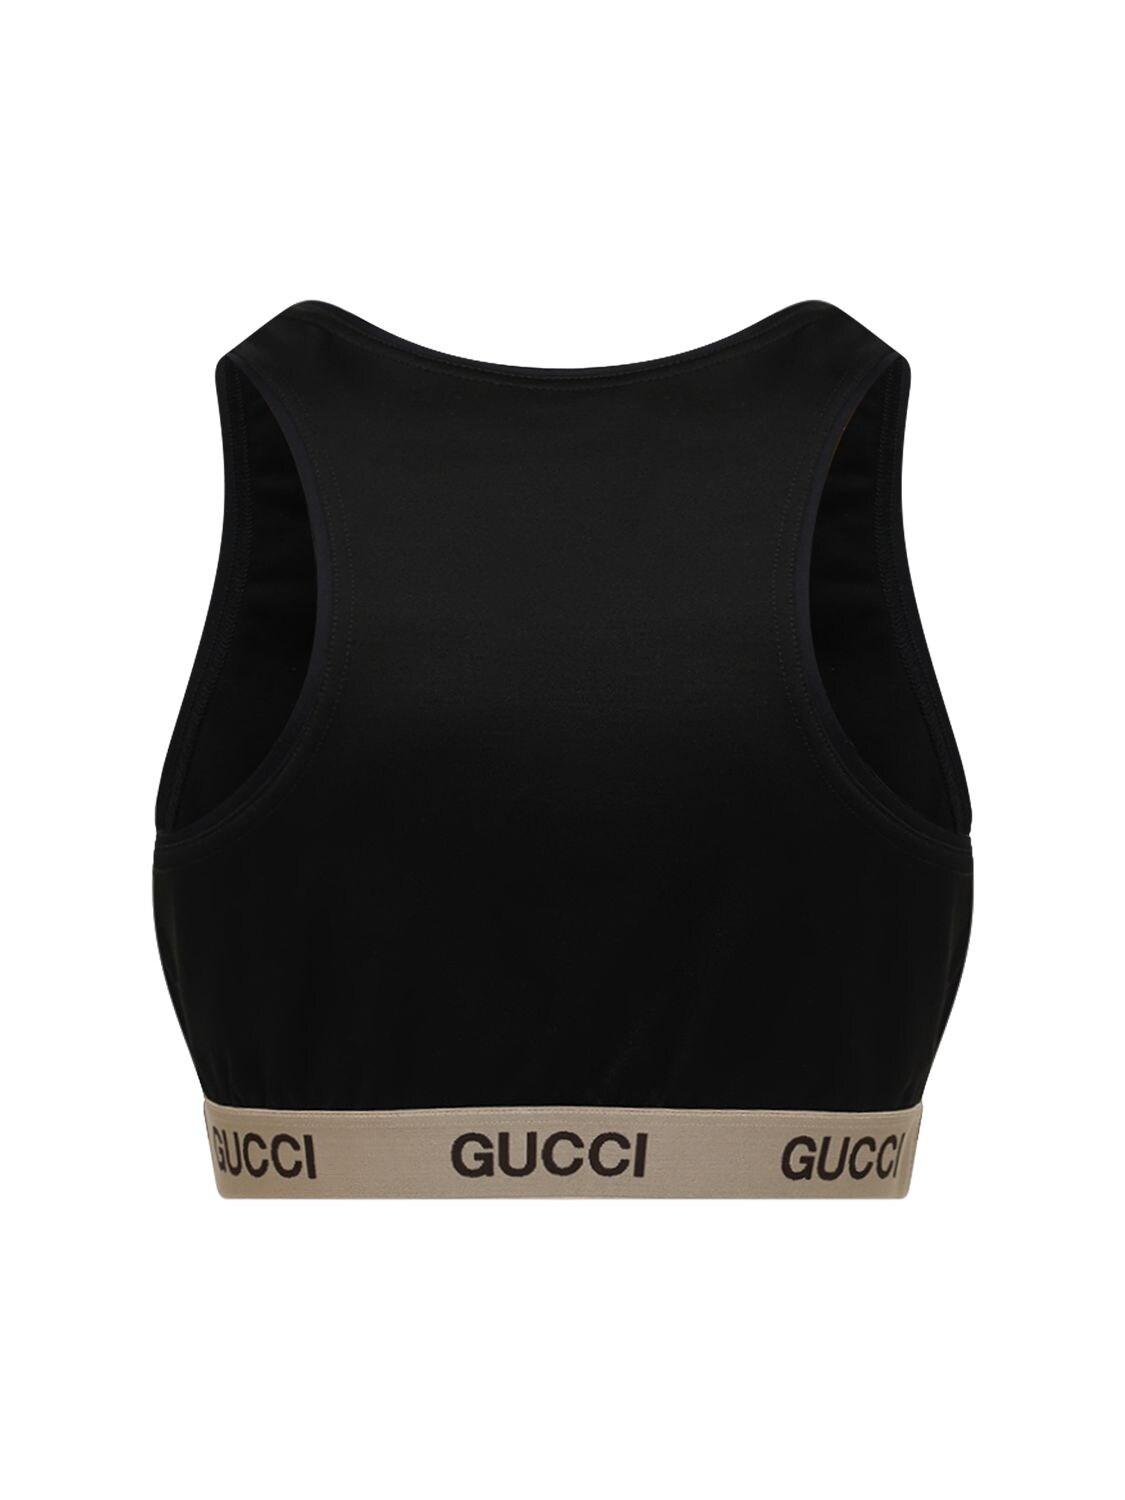 Gucci The North Face Technical Jersey Crop Top in Black